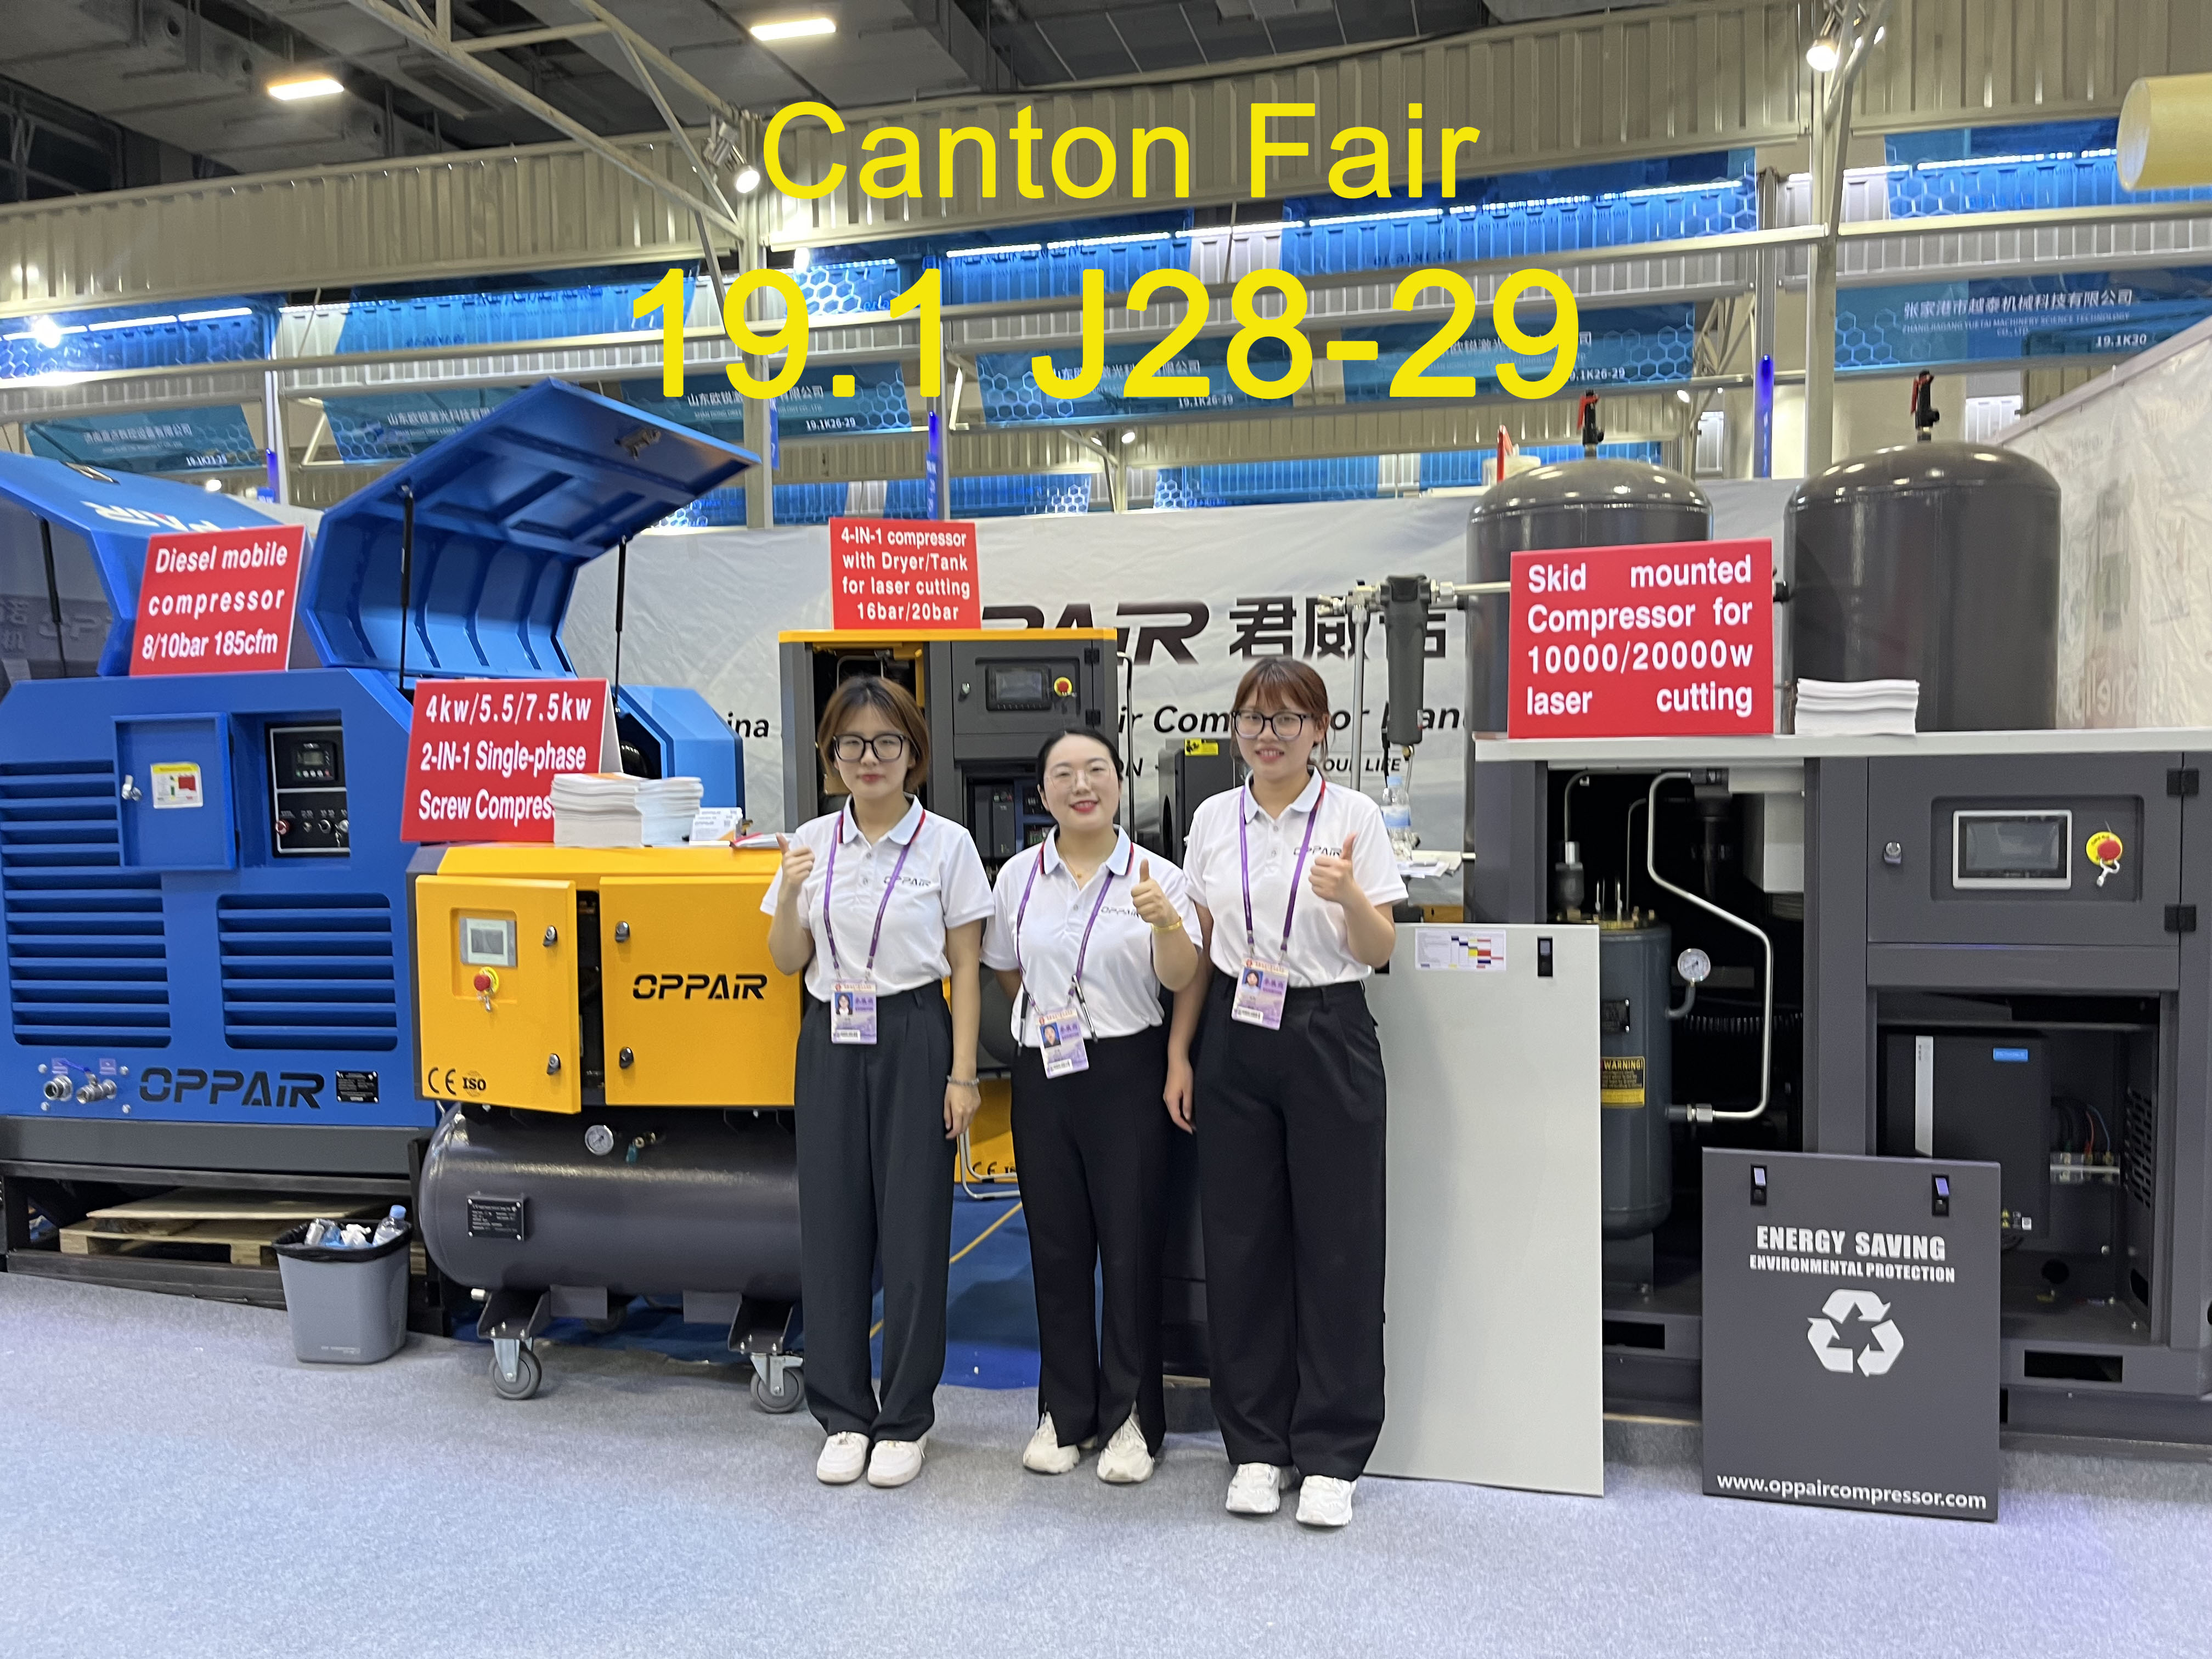 OPPAIR 135th Canton Fair concluded successfully